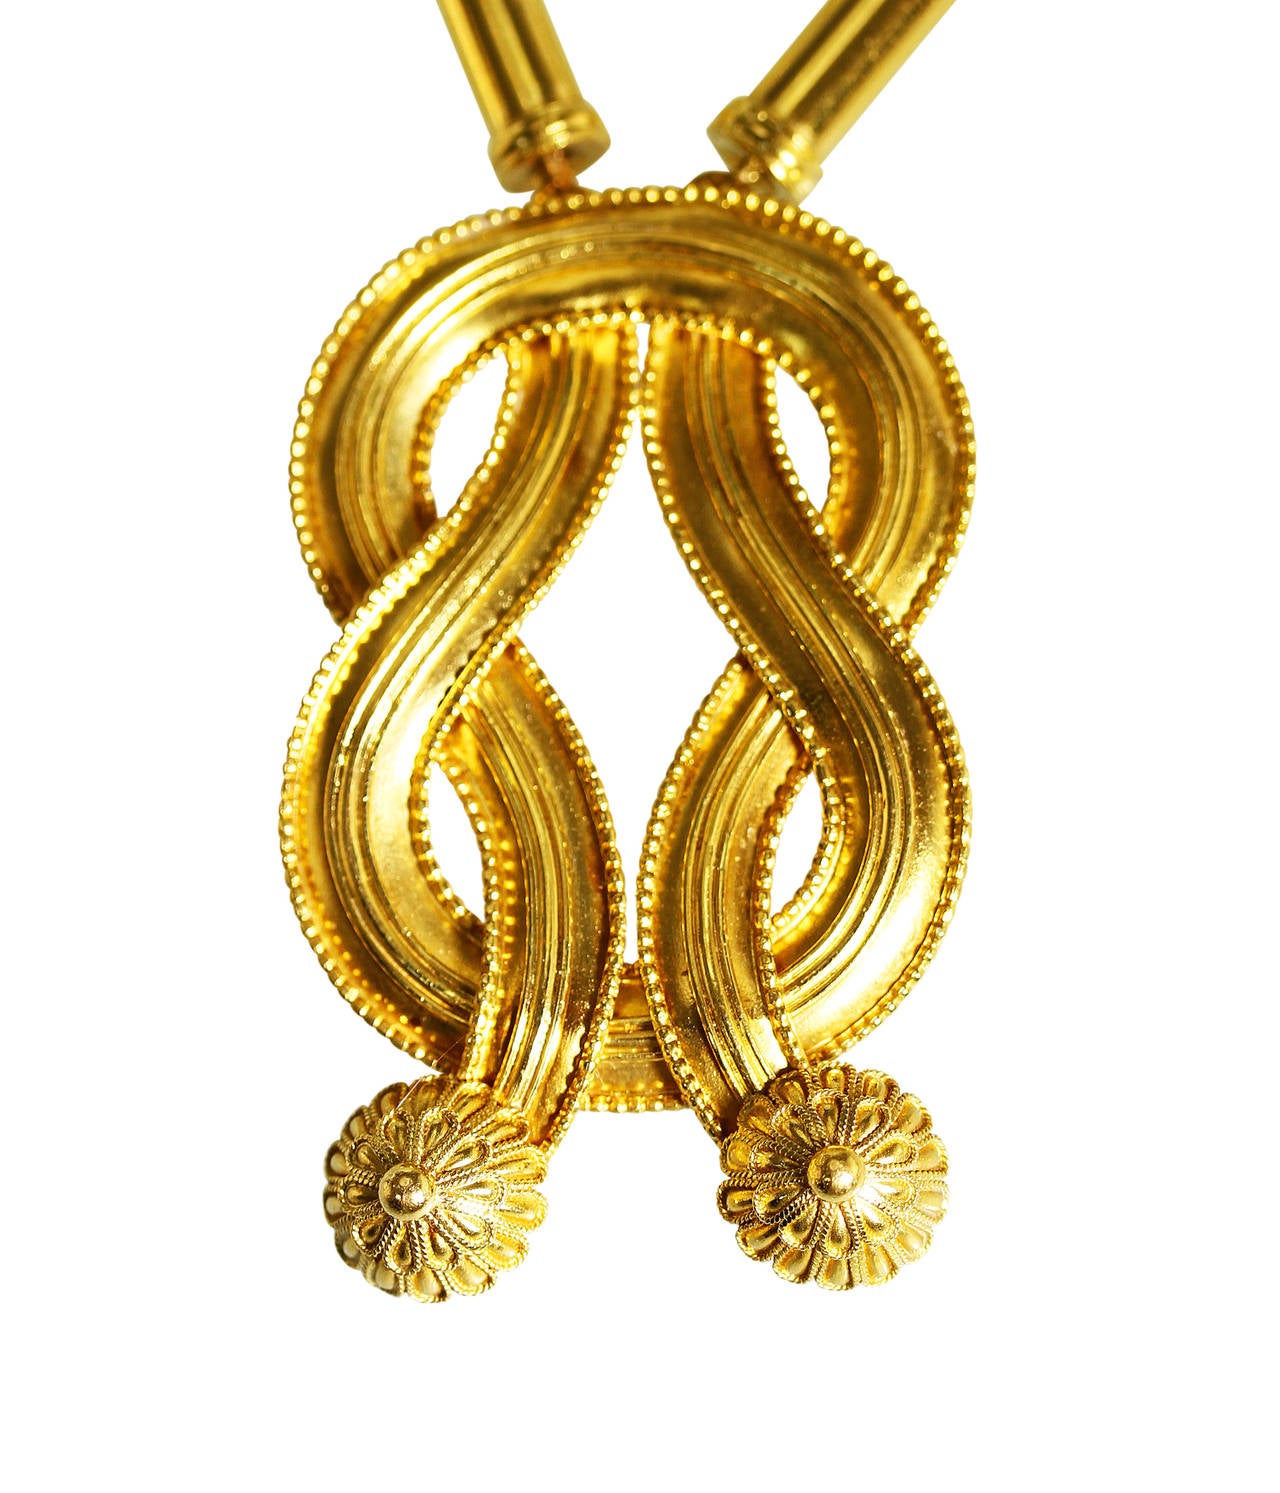 A 22 karat yellow gold pendant necklace by Lalaounis, designed as a long chain of barrel links completed by a Herculean knot at the center, gross weight 105.6 grams, length 24 inches, drop measuring 2 1/4 inches, with maker's mark.